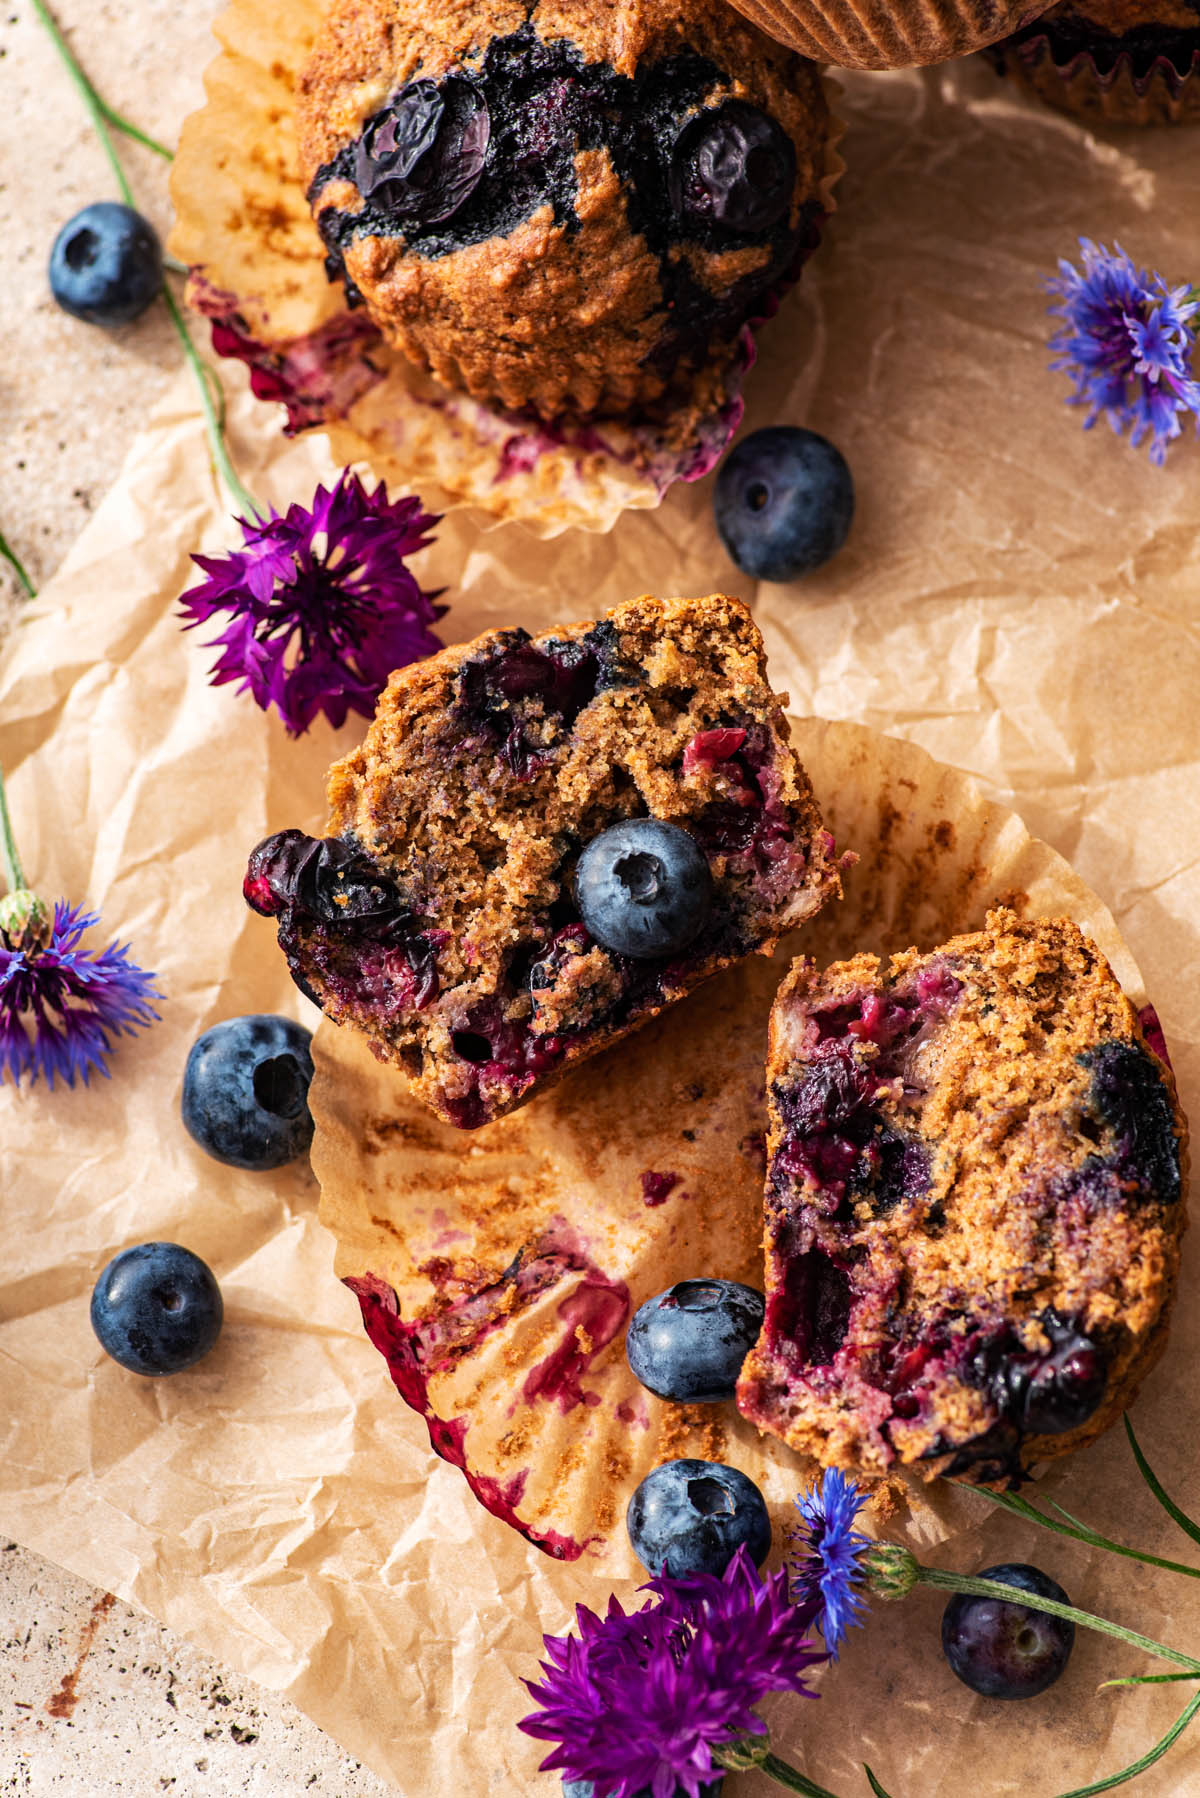 A muffin cut in half with edible flowers and fresh berries around.